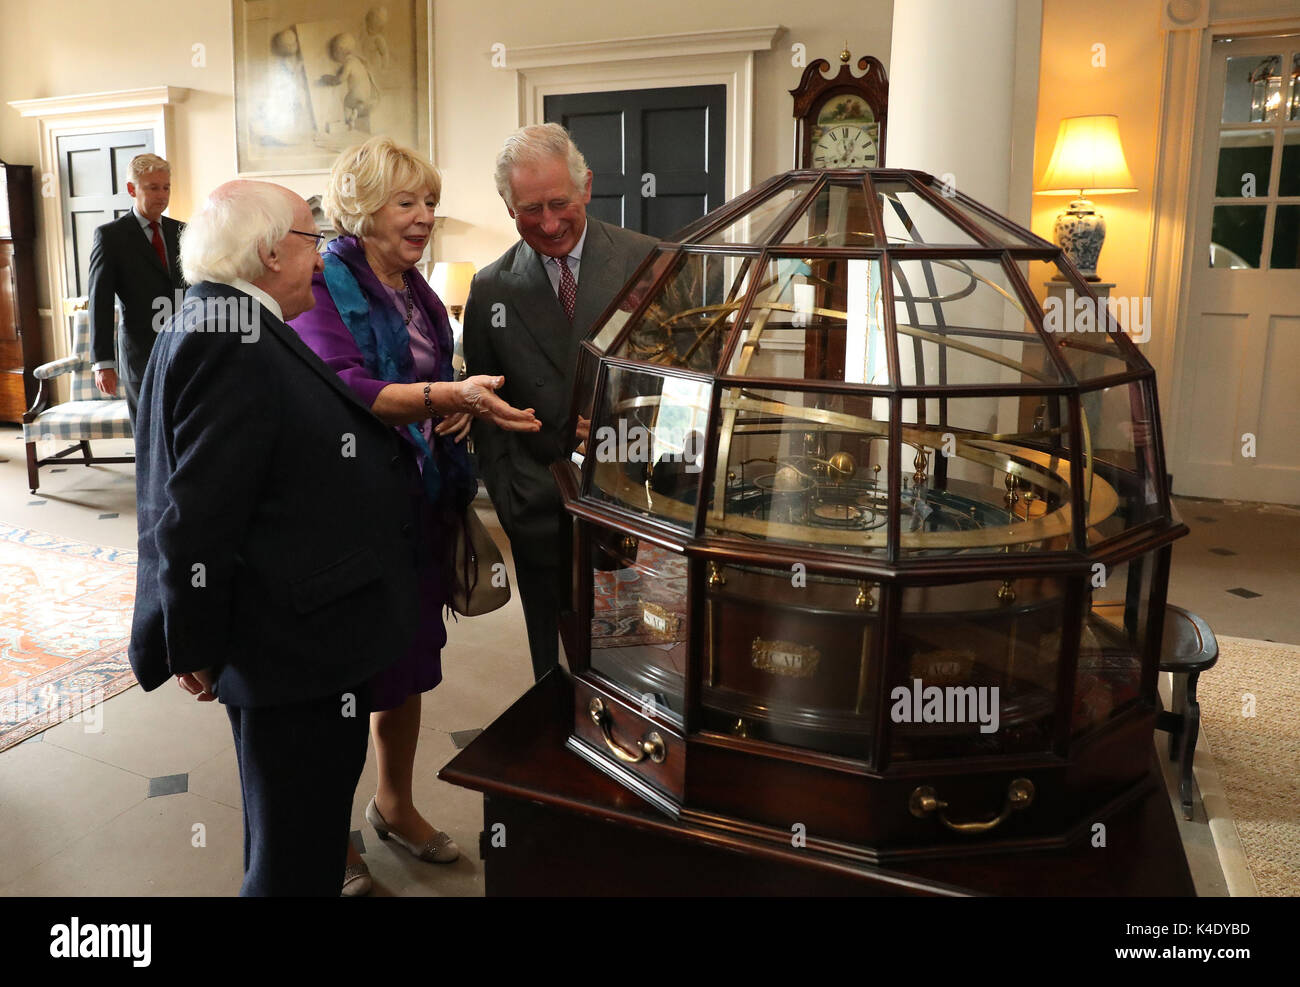 The Prince of Wales, known as the Duke of Rothesay in Scotland, President of Ireland Michael D Higgins and his wife Sabina view the Grand Orrery, an 18th century mechanical model of the solar system, at Dumfries House in East Ayrshire. Stock Photo